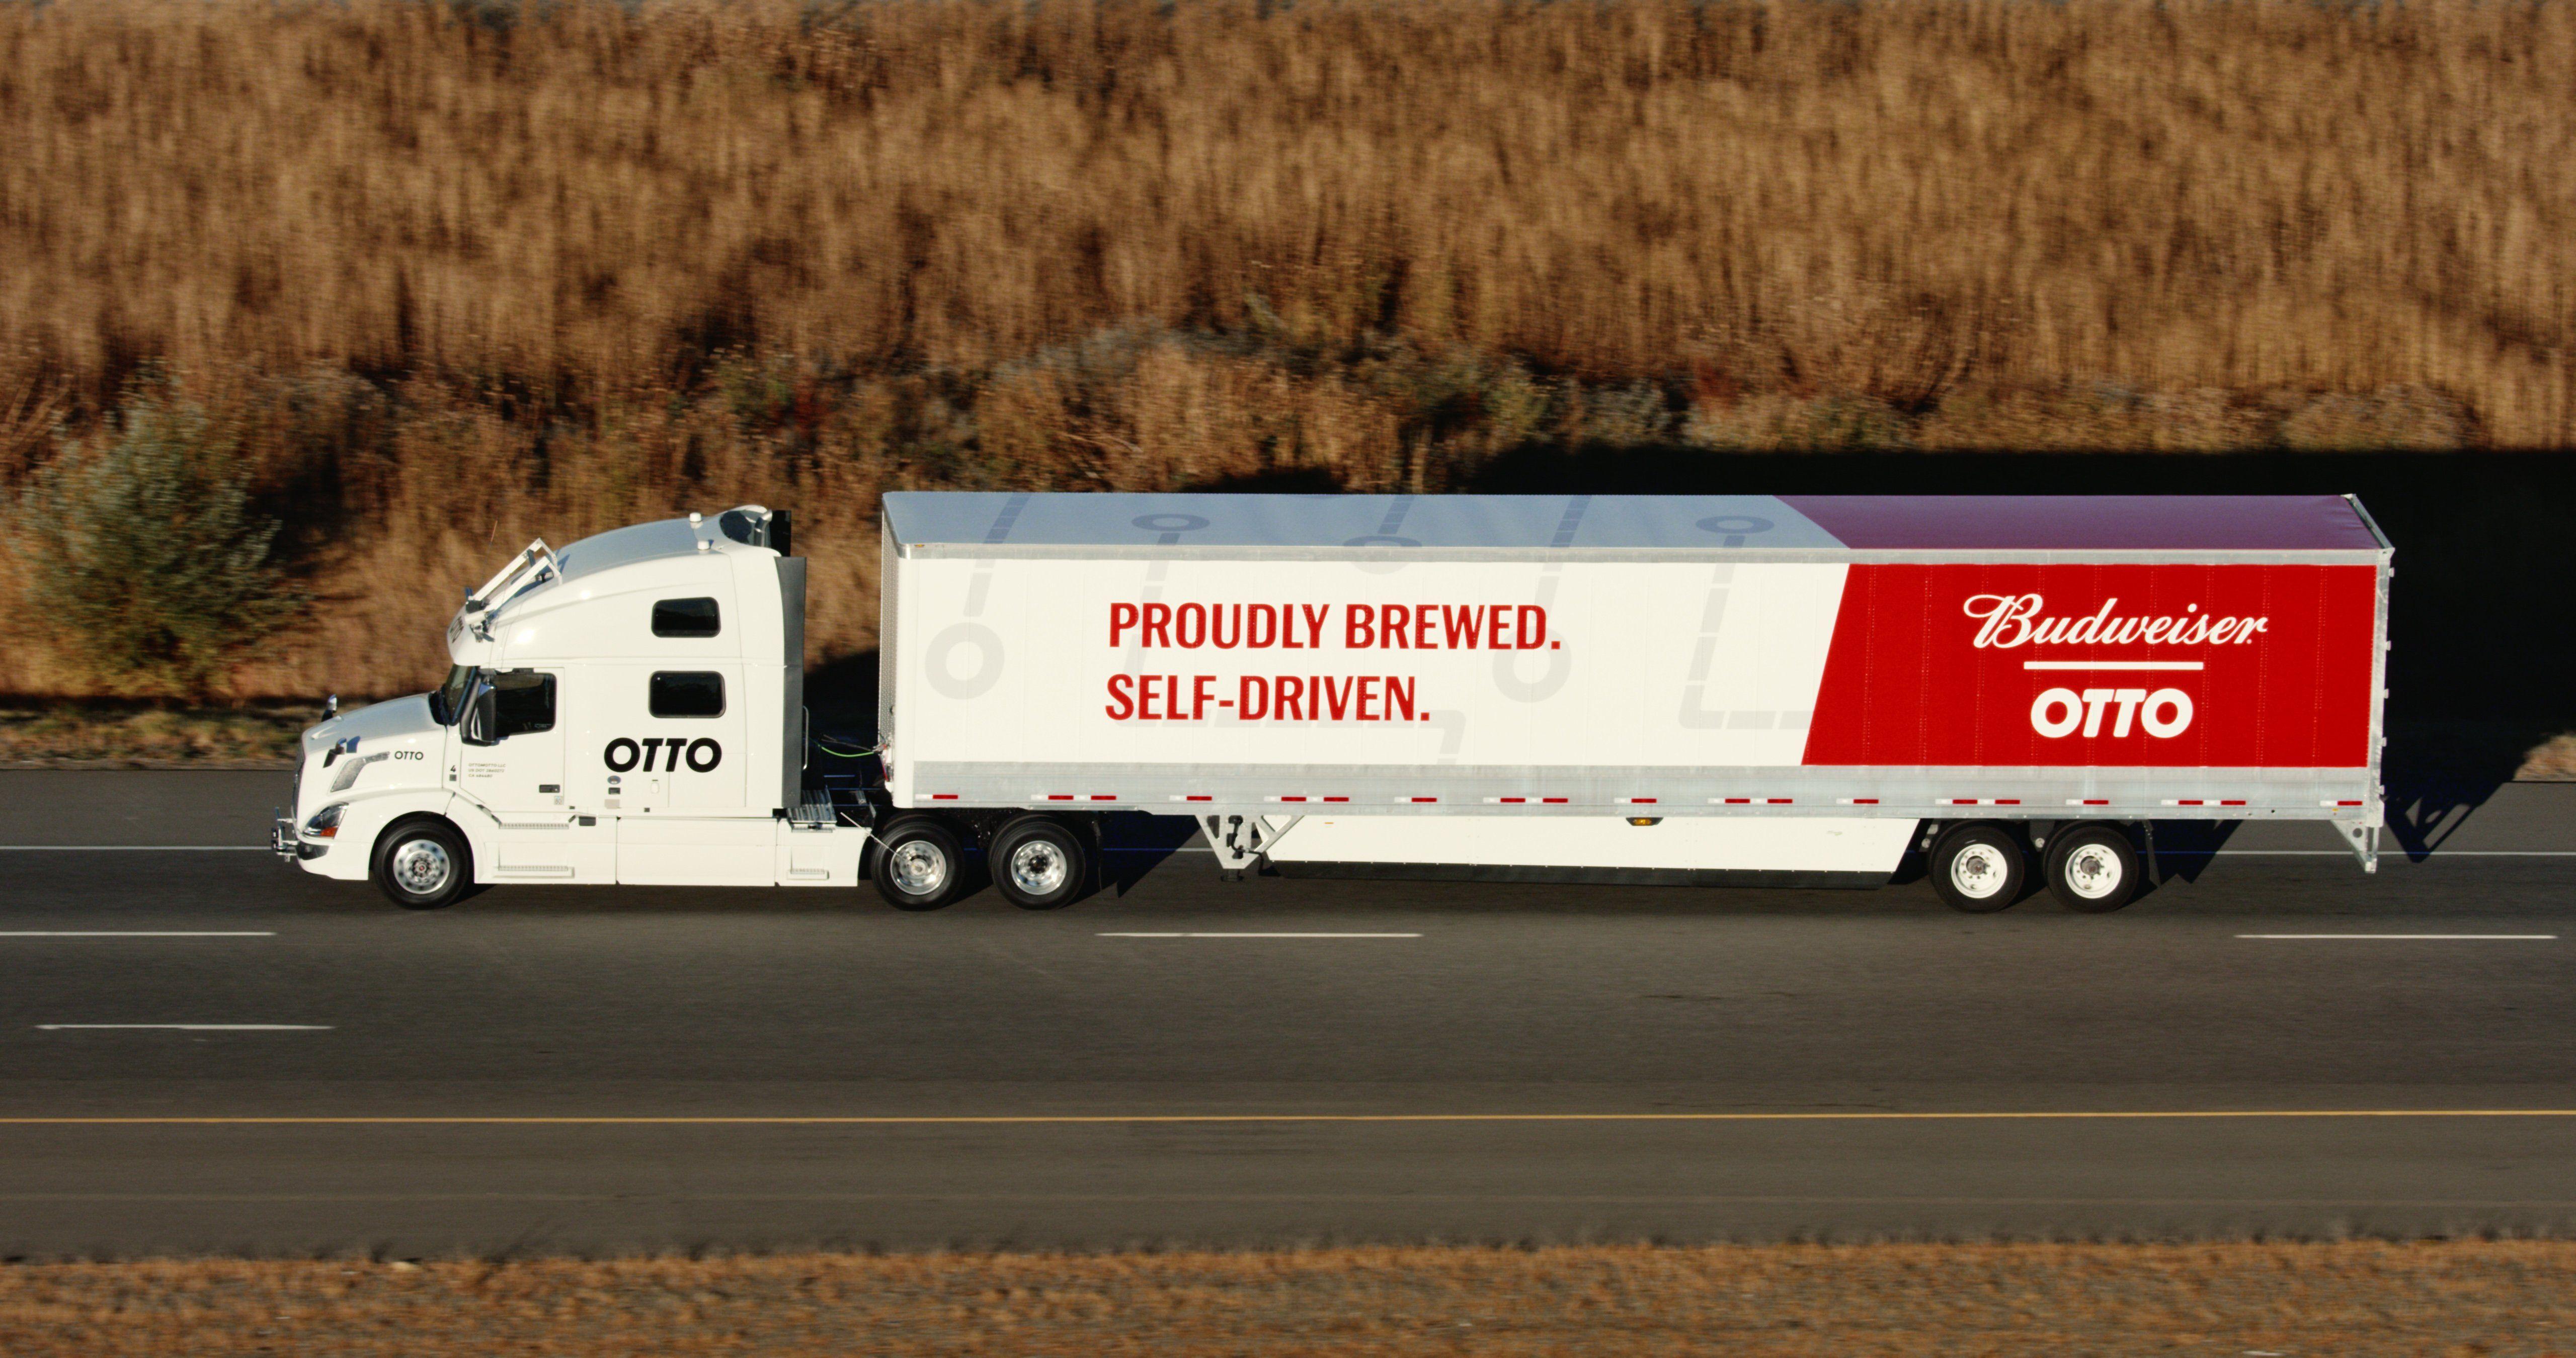 Uber Semi Truck Logo - Uber's Self-Driving Truck Unit Otto Makes Budweiser Delivery | Time